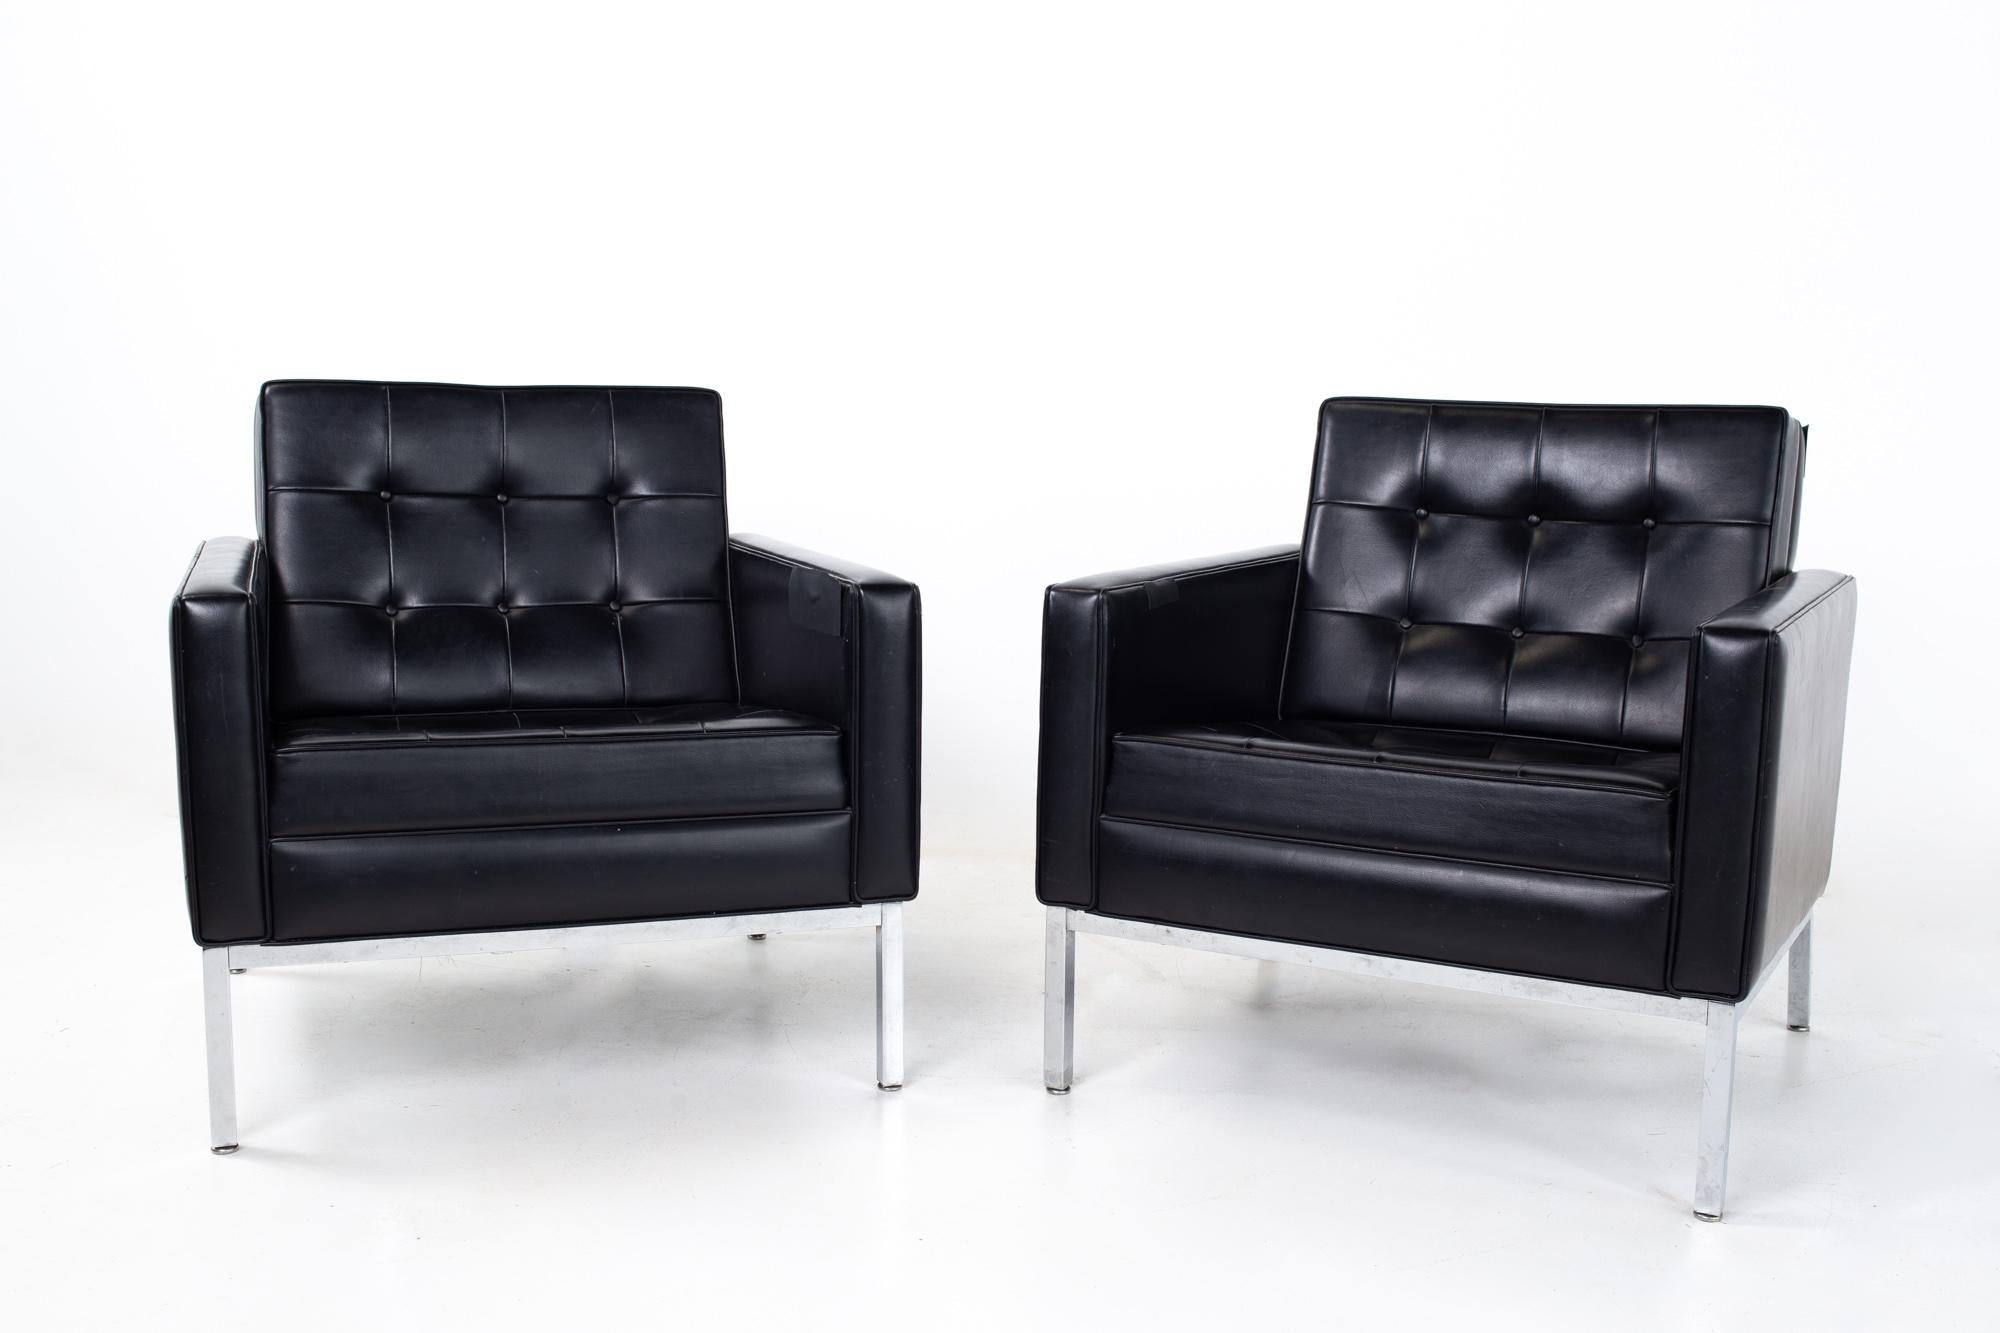 Florence Knoll style mid century black leather and chrome club lounge chairs - pair

Each lounge chair measures: 31 wide x 31 deep x 30.5 high, with a seat height of 17 inches

Ready for re-upholstery

?All pieces of furniture can be had in what we